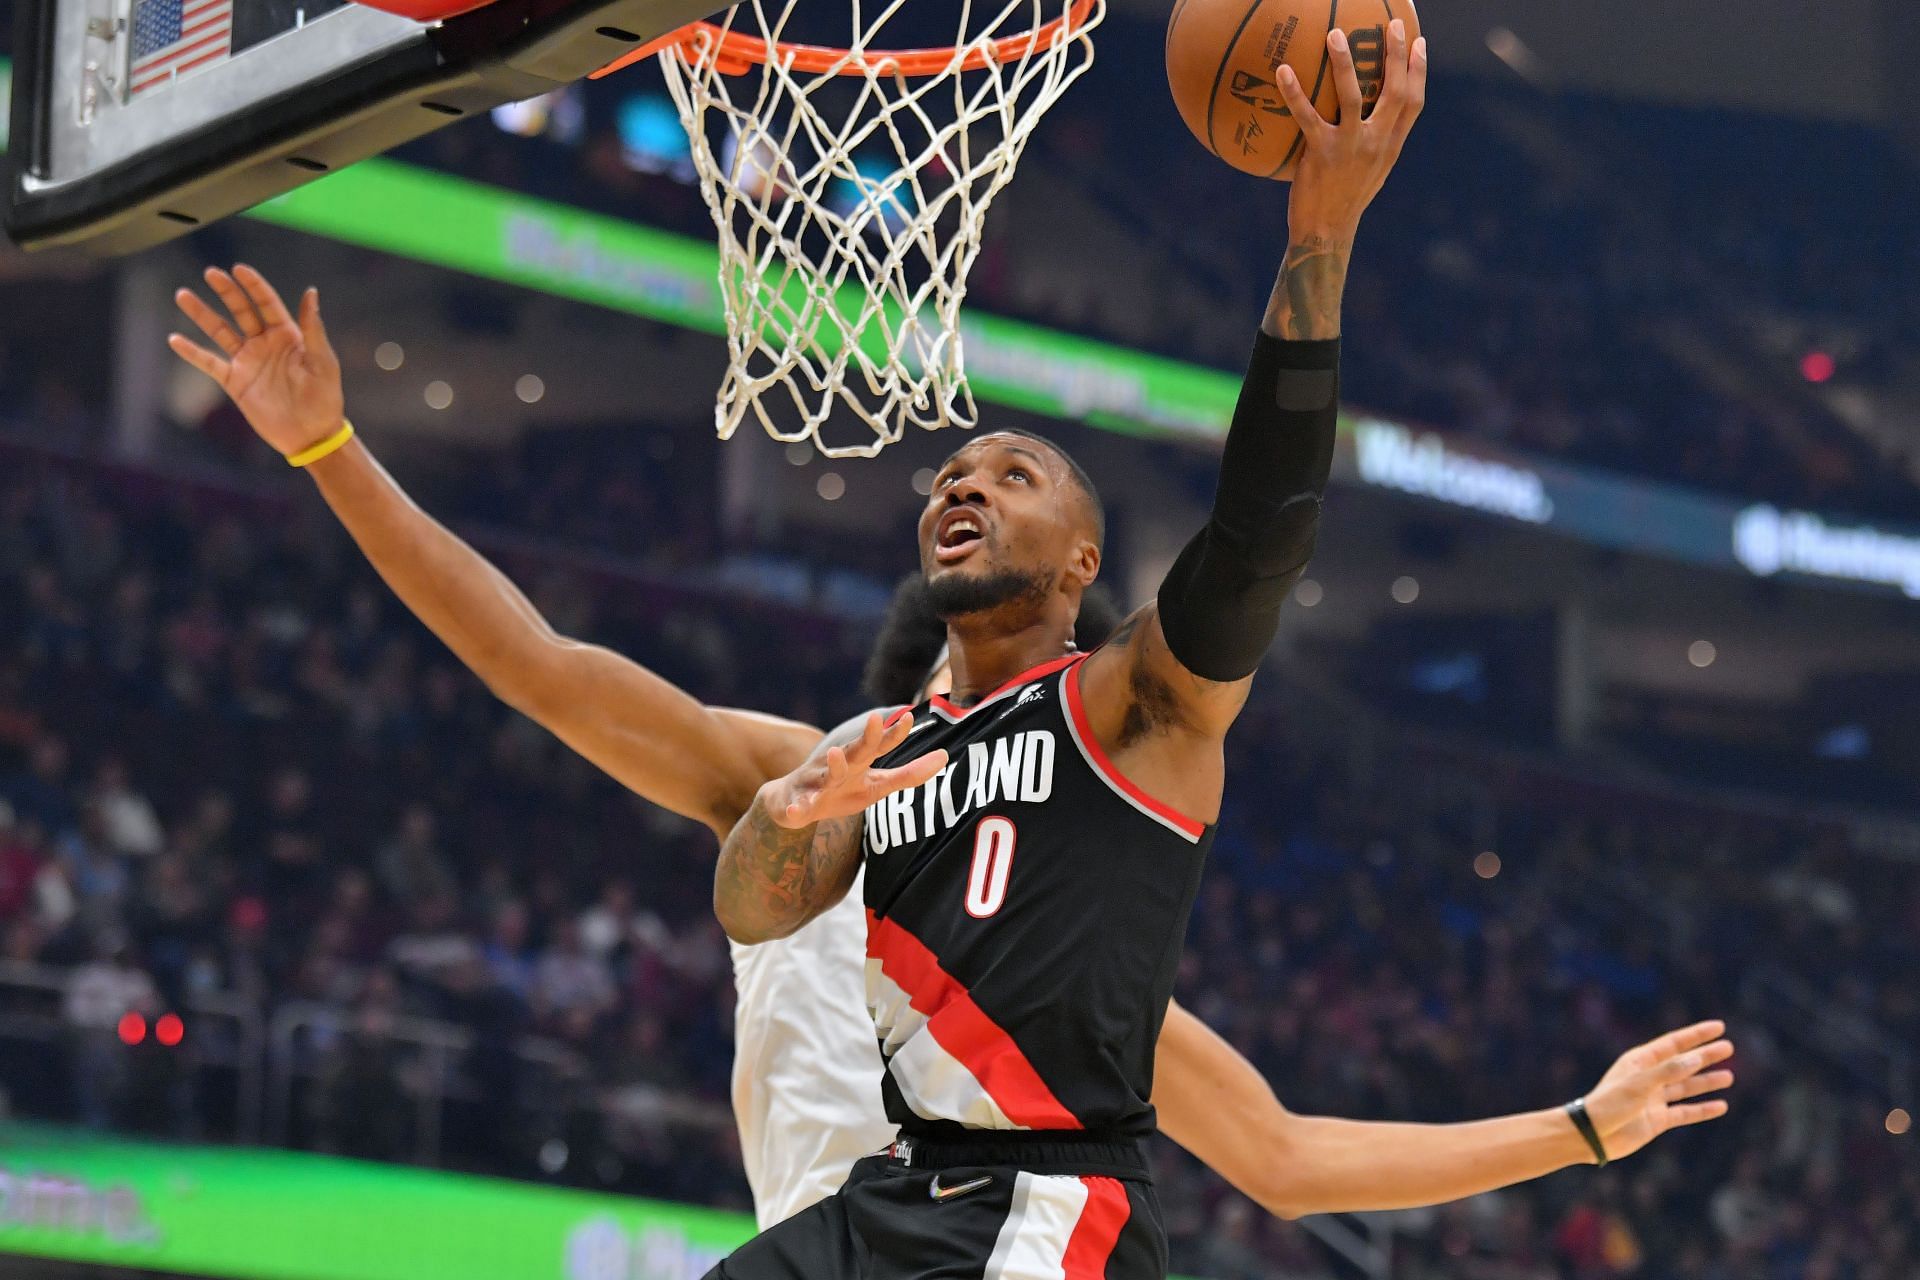 Portland Trail Blazers will host the Indiana Pacers for a 2021-22 NBA game on Friday.